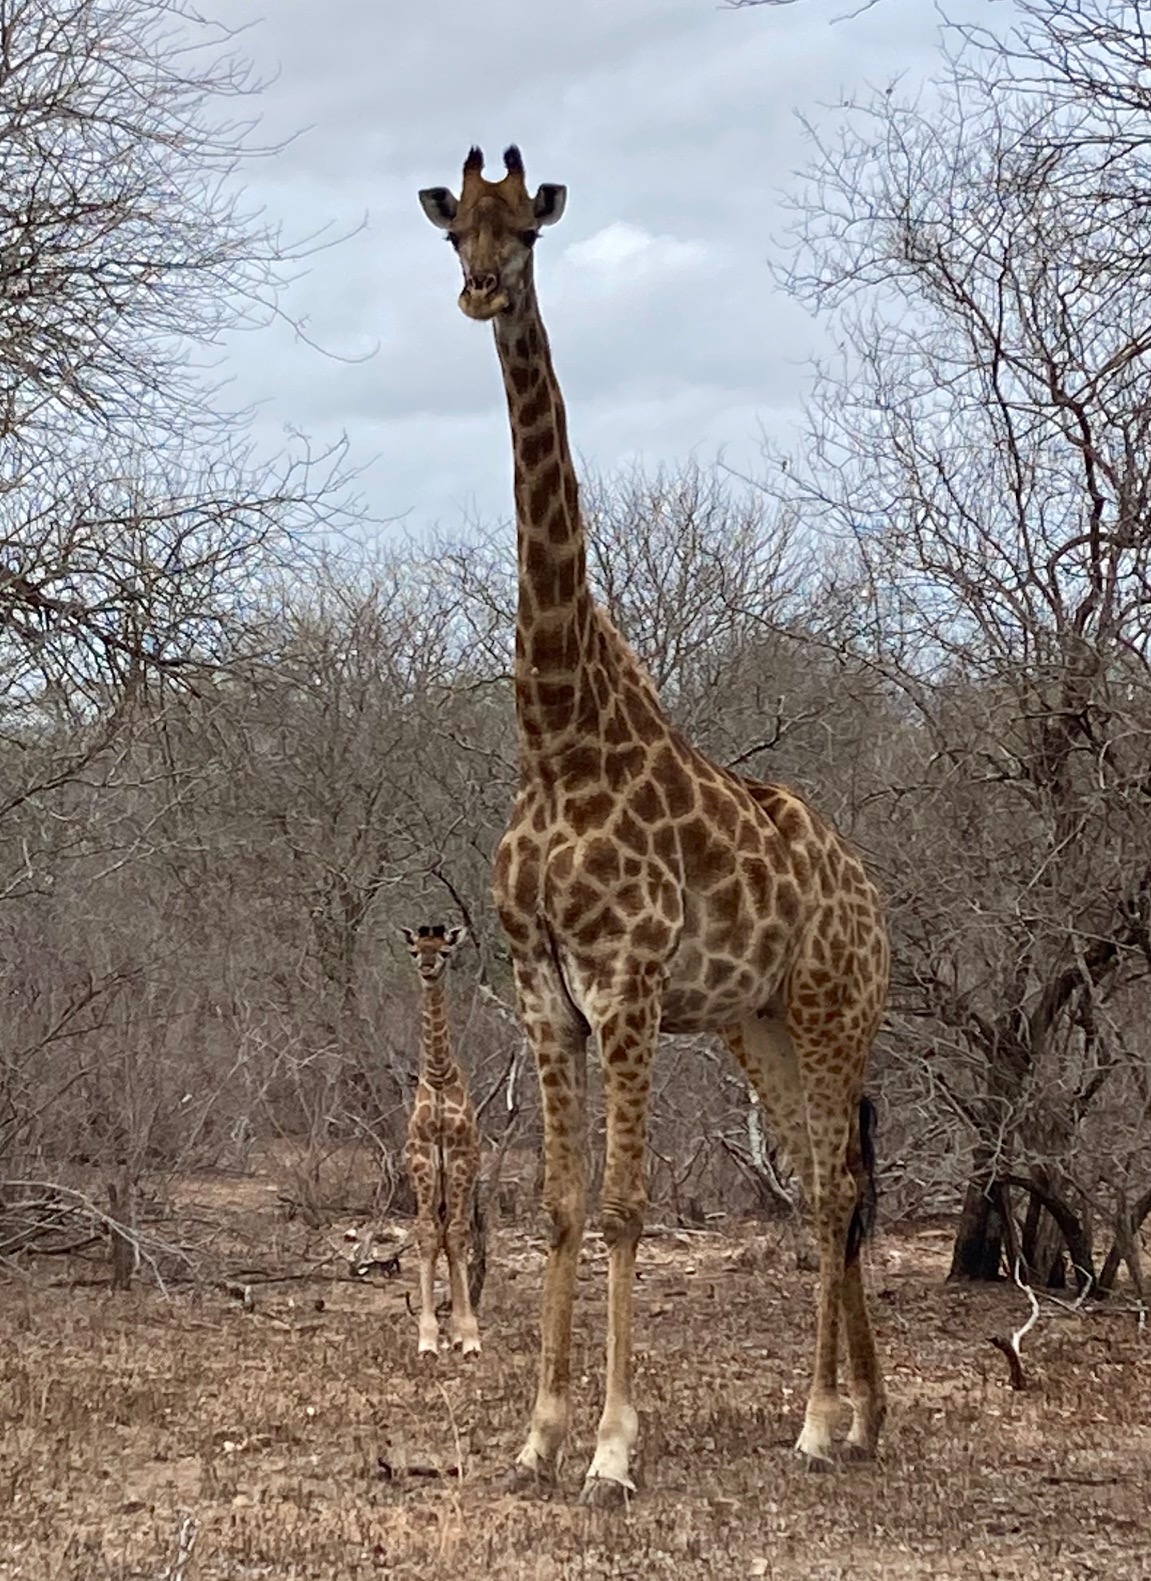 On our month long safari in Africa this giraffe and her baby used to visit our house!